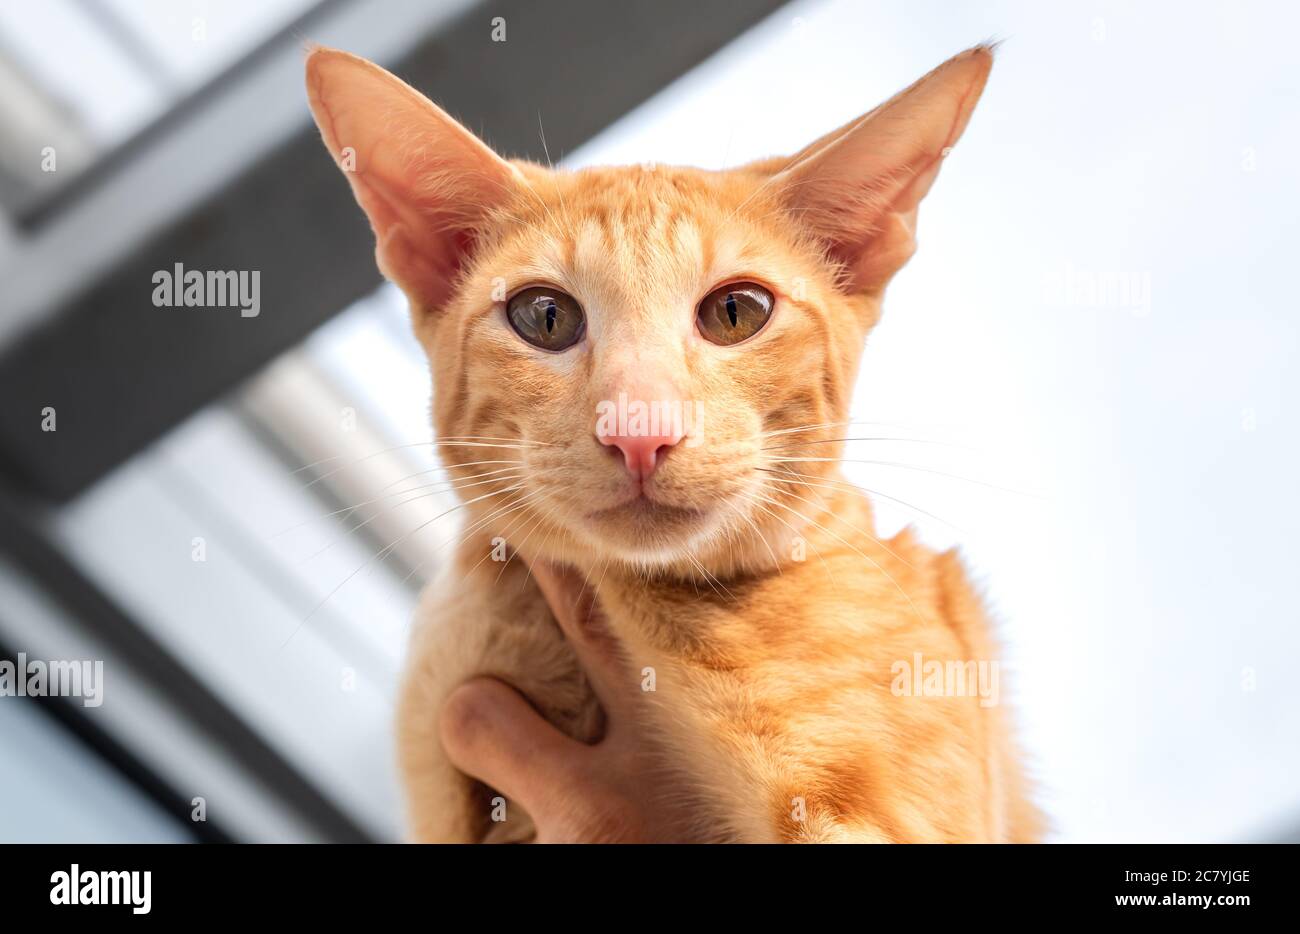 Portrait of Oriental red cat with big ears, clear eyes and long nose. Stock Photo